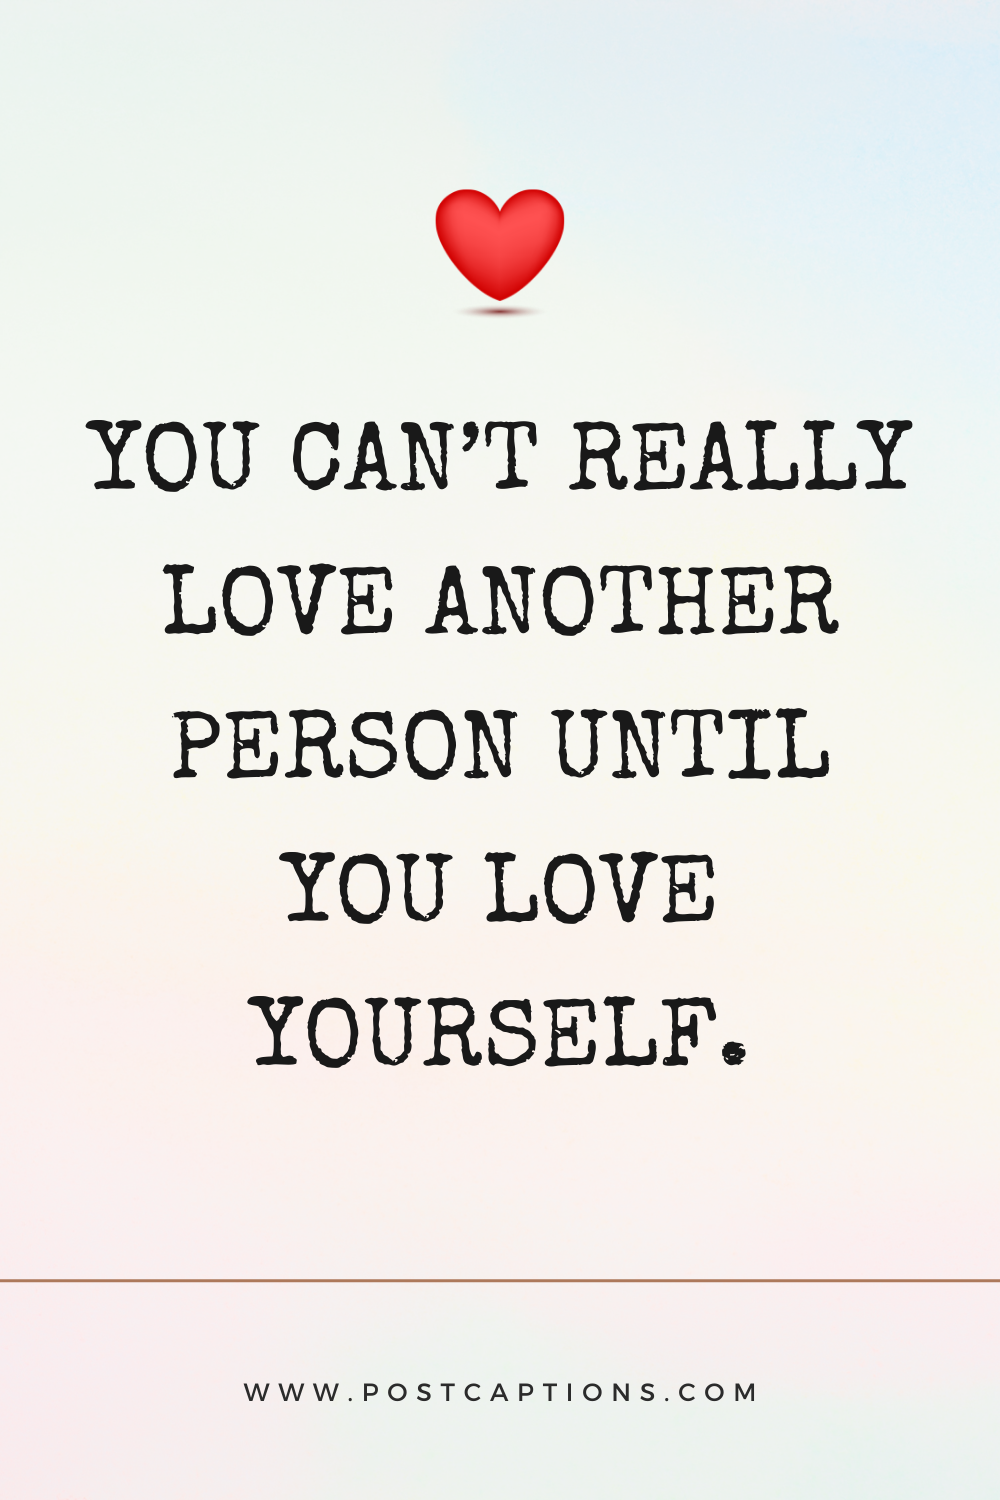 Short self-love quotes for instagram captions